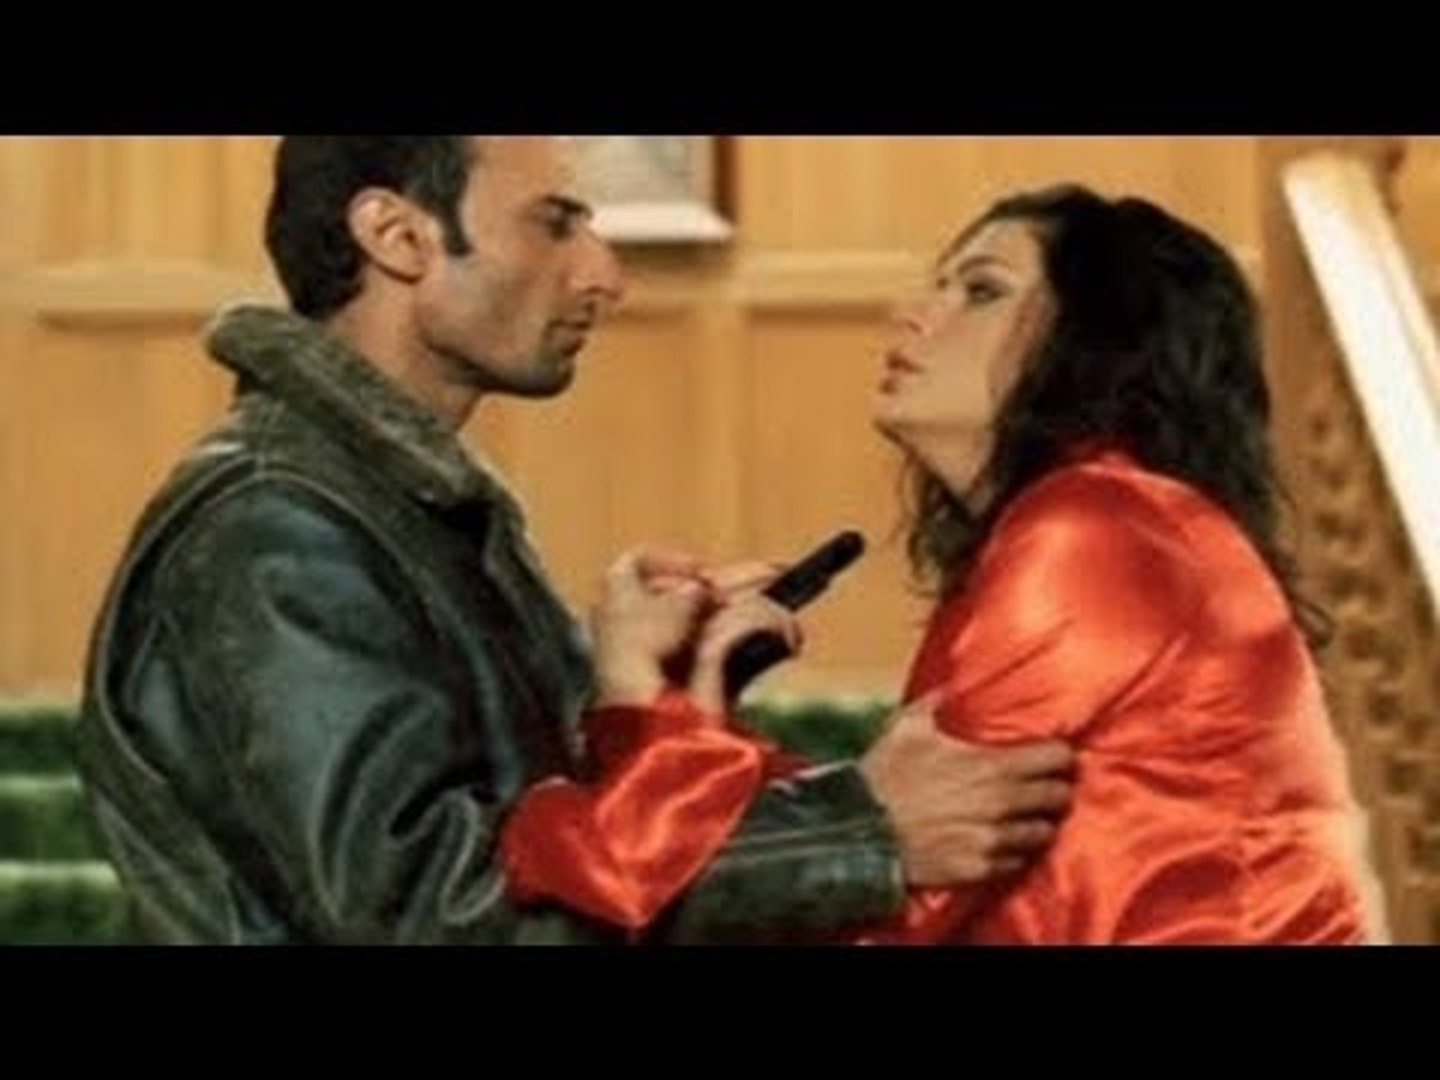 H0t DRUNK Russian GIRL SEDUCING Cape Karma Bollywood Sex Thriller picture image